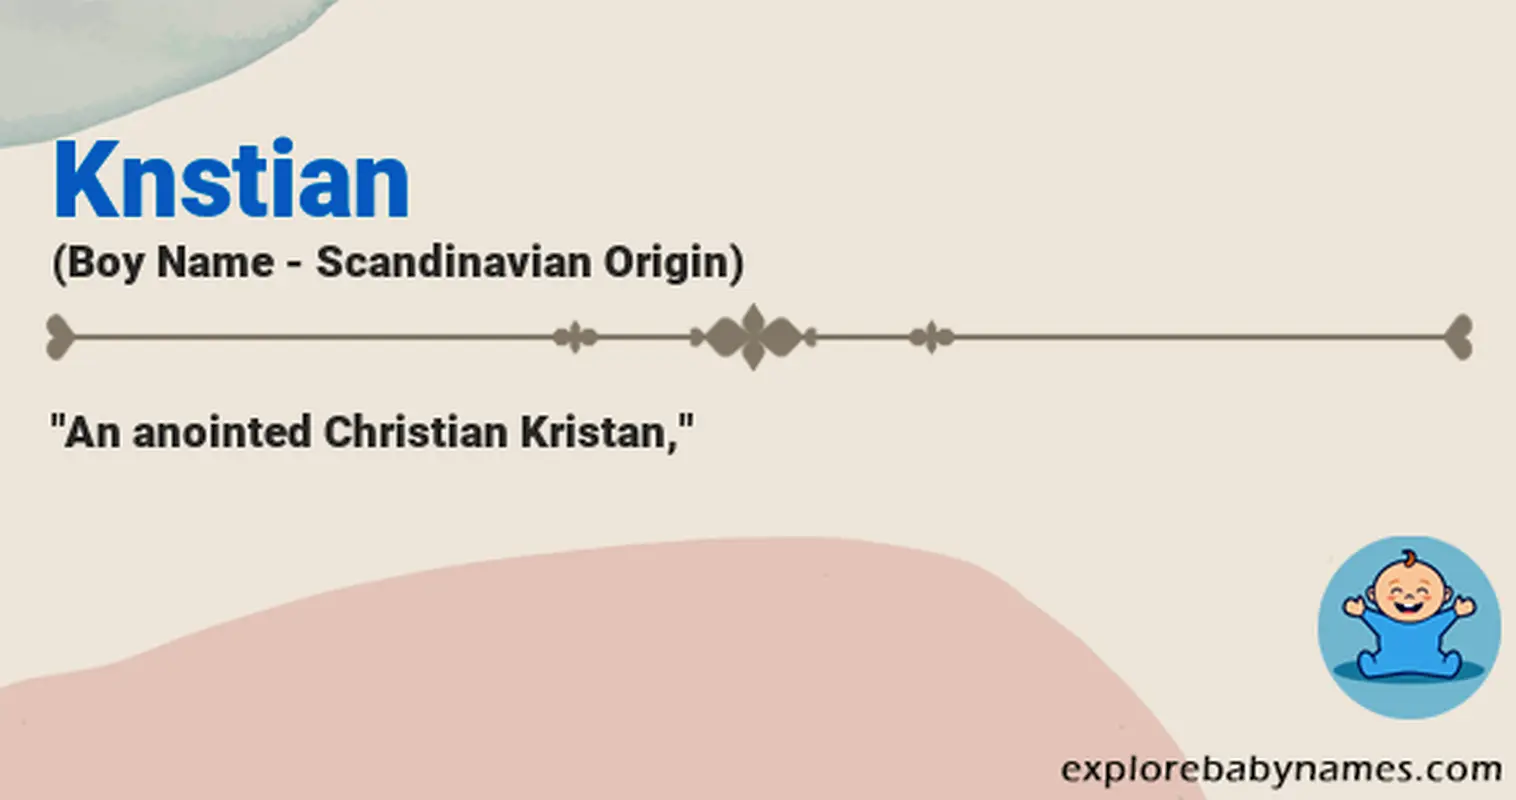 Meaning of Knstian